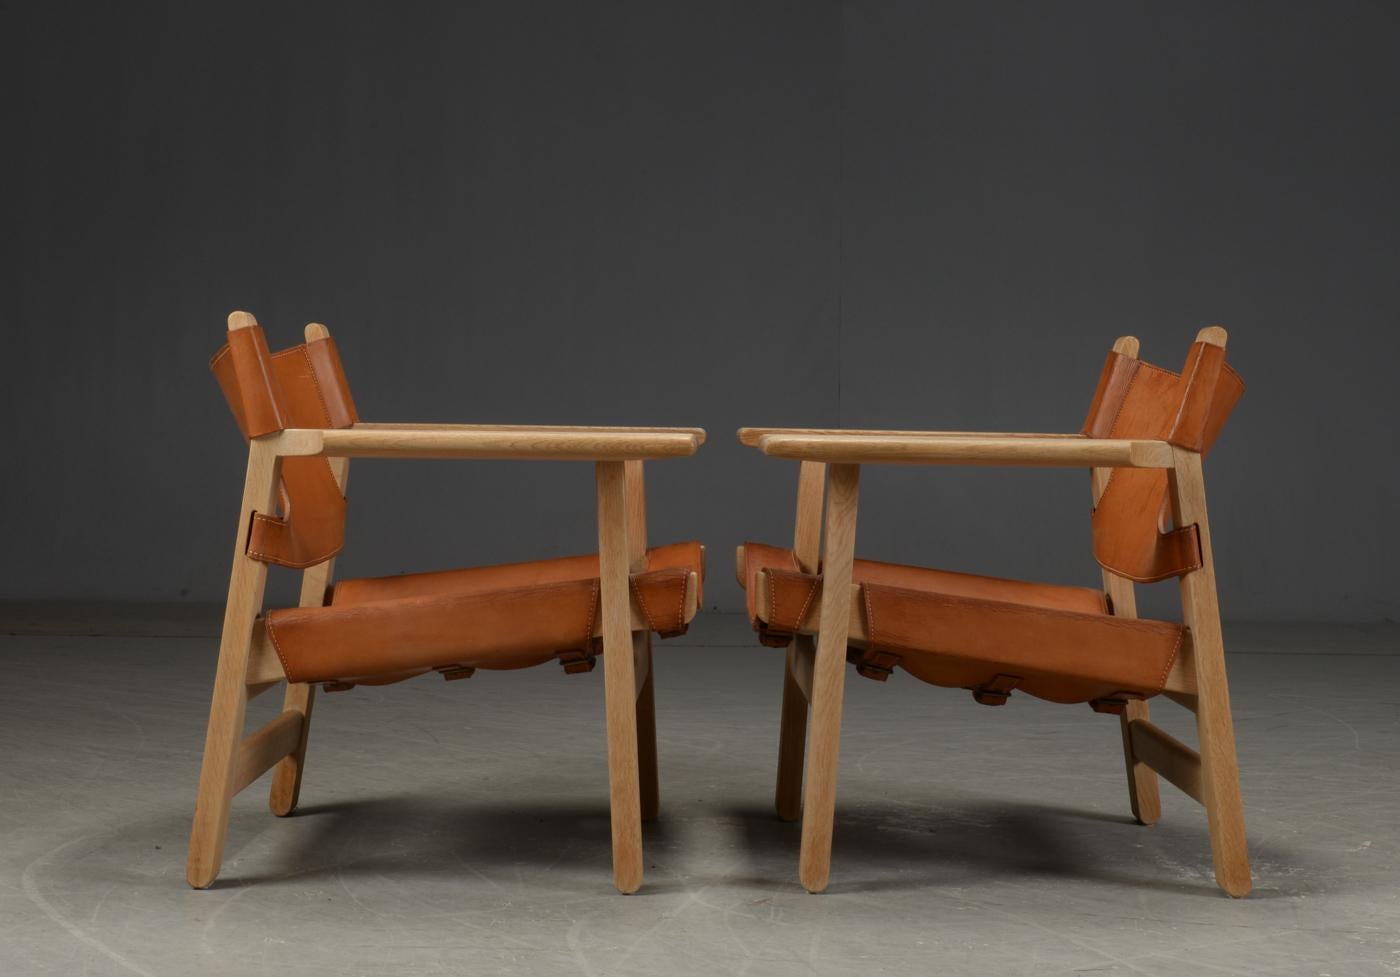 A very good original pair of earlier model Spanish lounge chairs in oak with cognac color saddle leather seats and backs.
 
The earlier models can be distinguished from later versions by the fact they have two cross 'stretchers' at the back rather